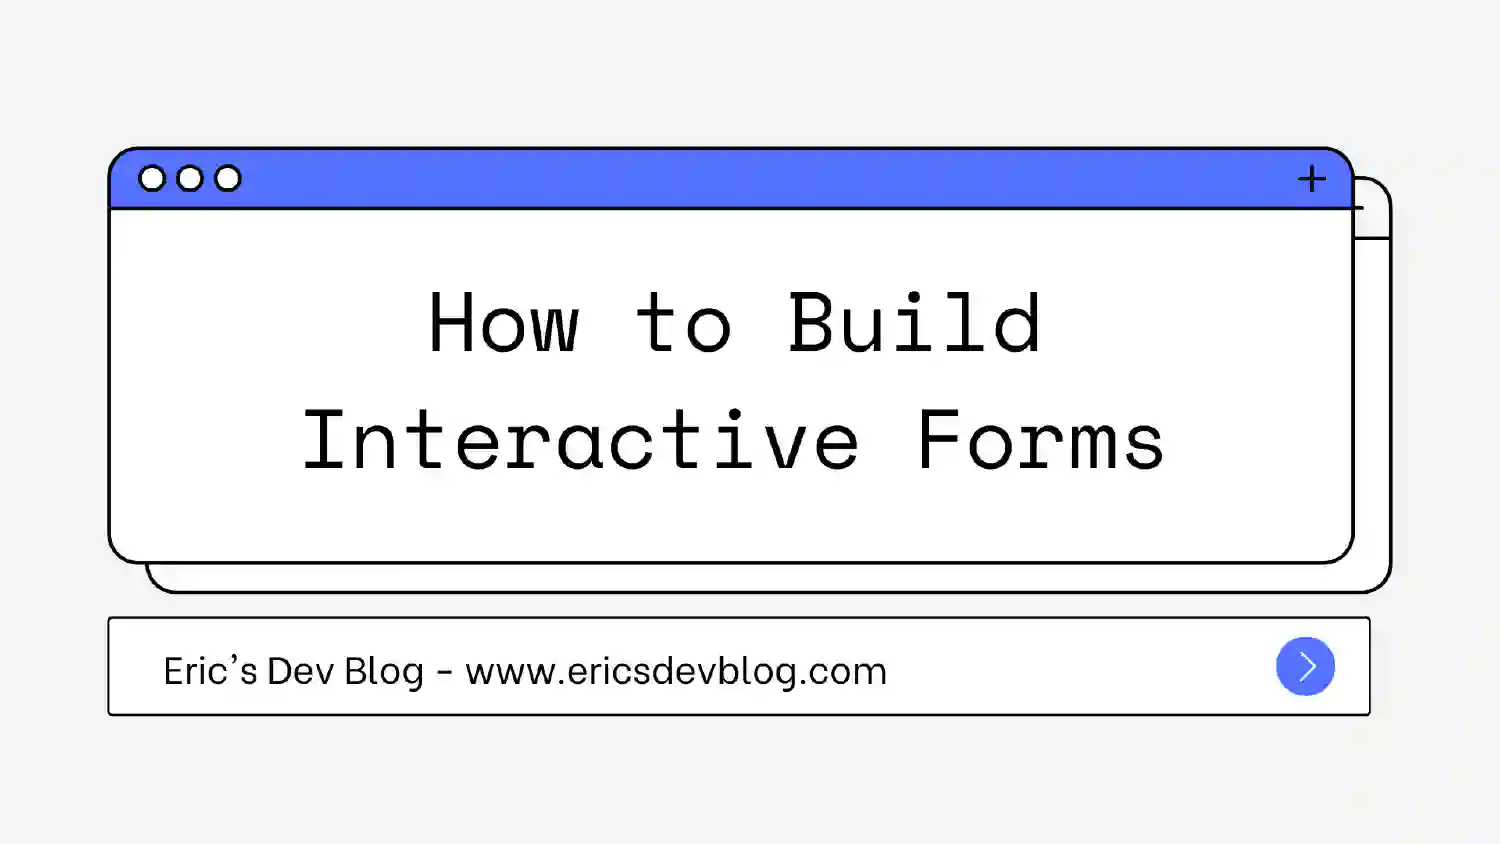 How to Build Interactive Forms Using HTML and CSS